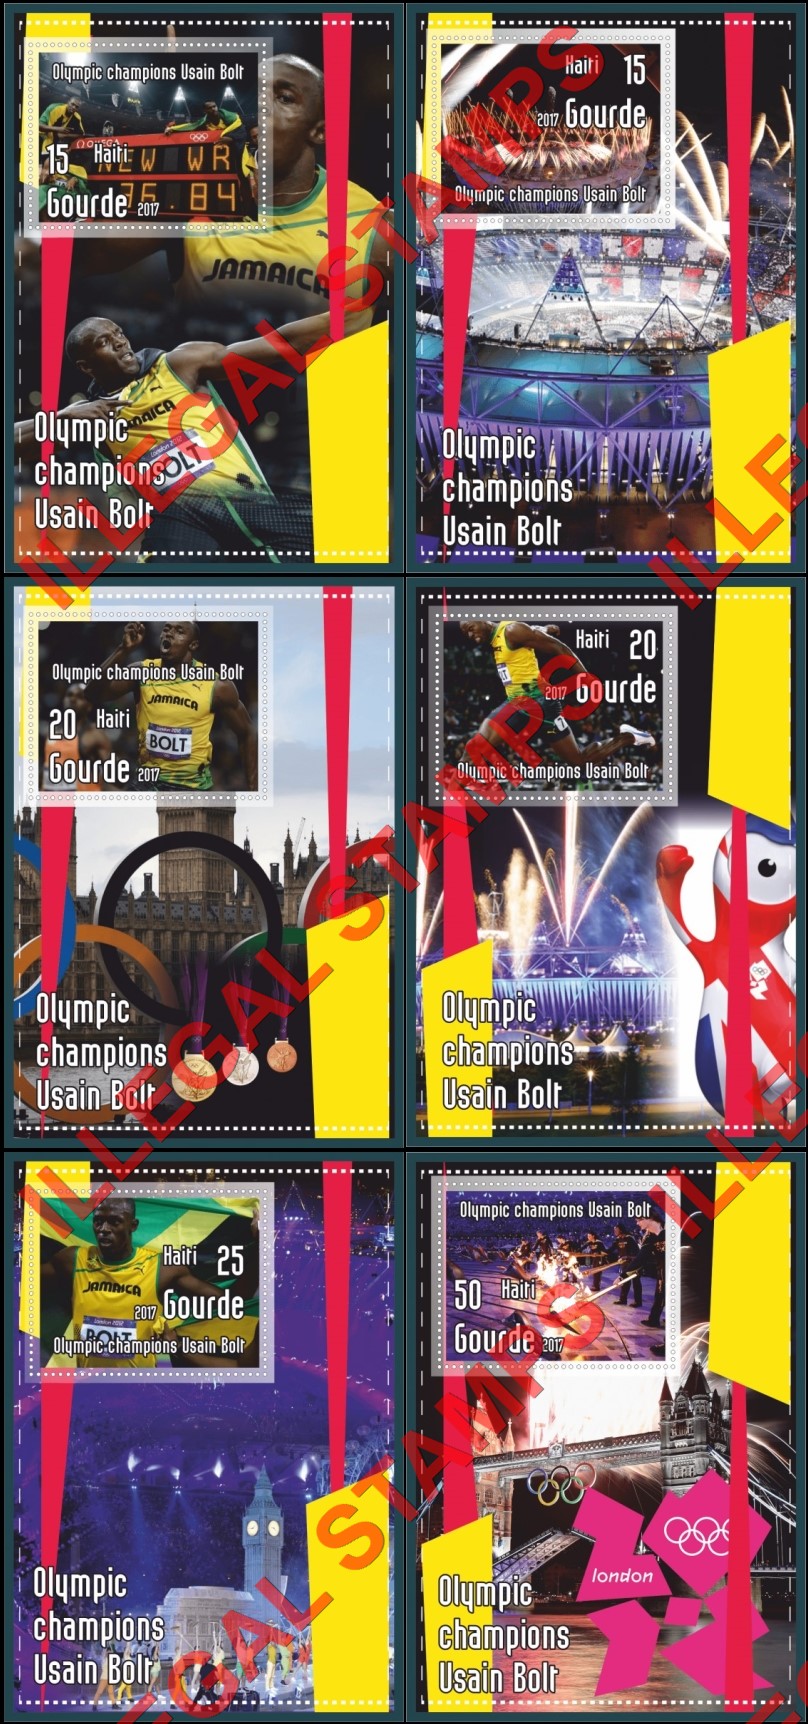 Haiti 2017 Olympic Champions in London 2012 Usain Bolt Illegal Stamp Souvenir Sheets of 1